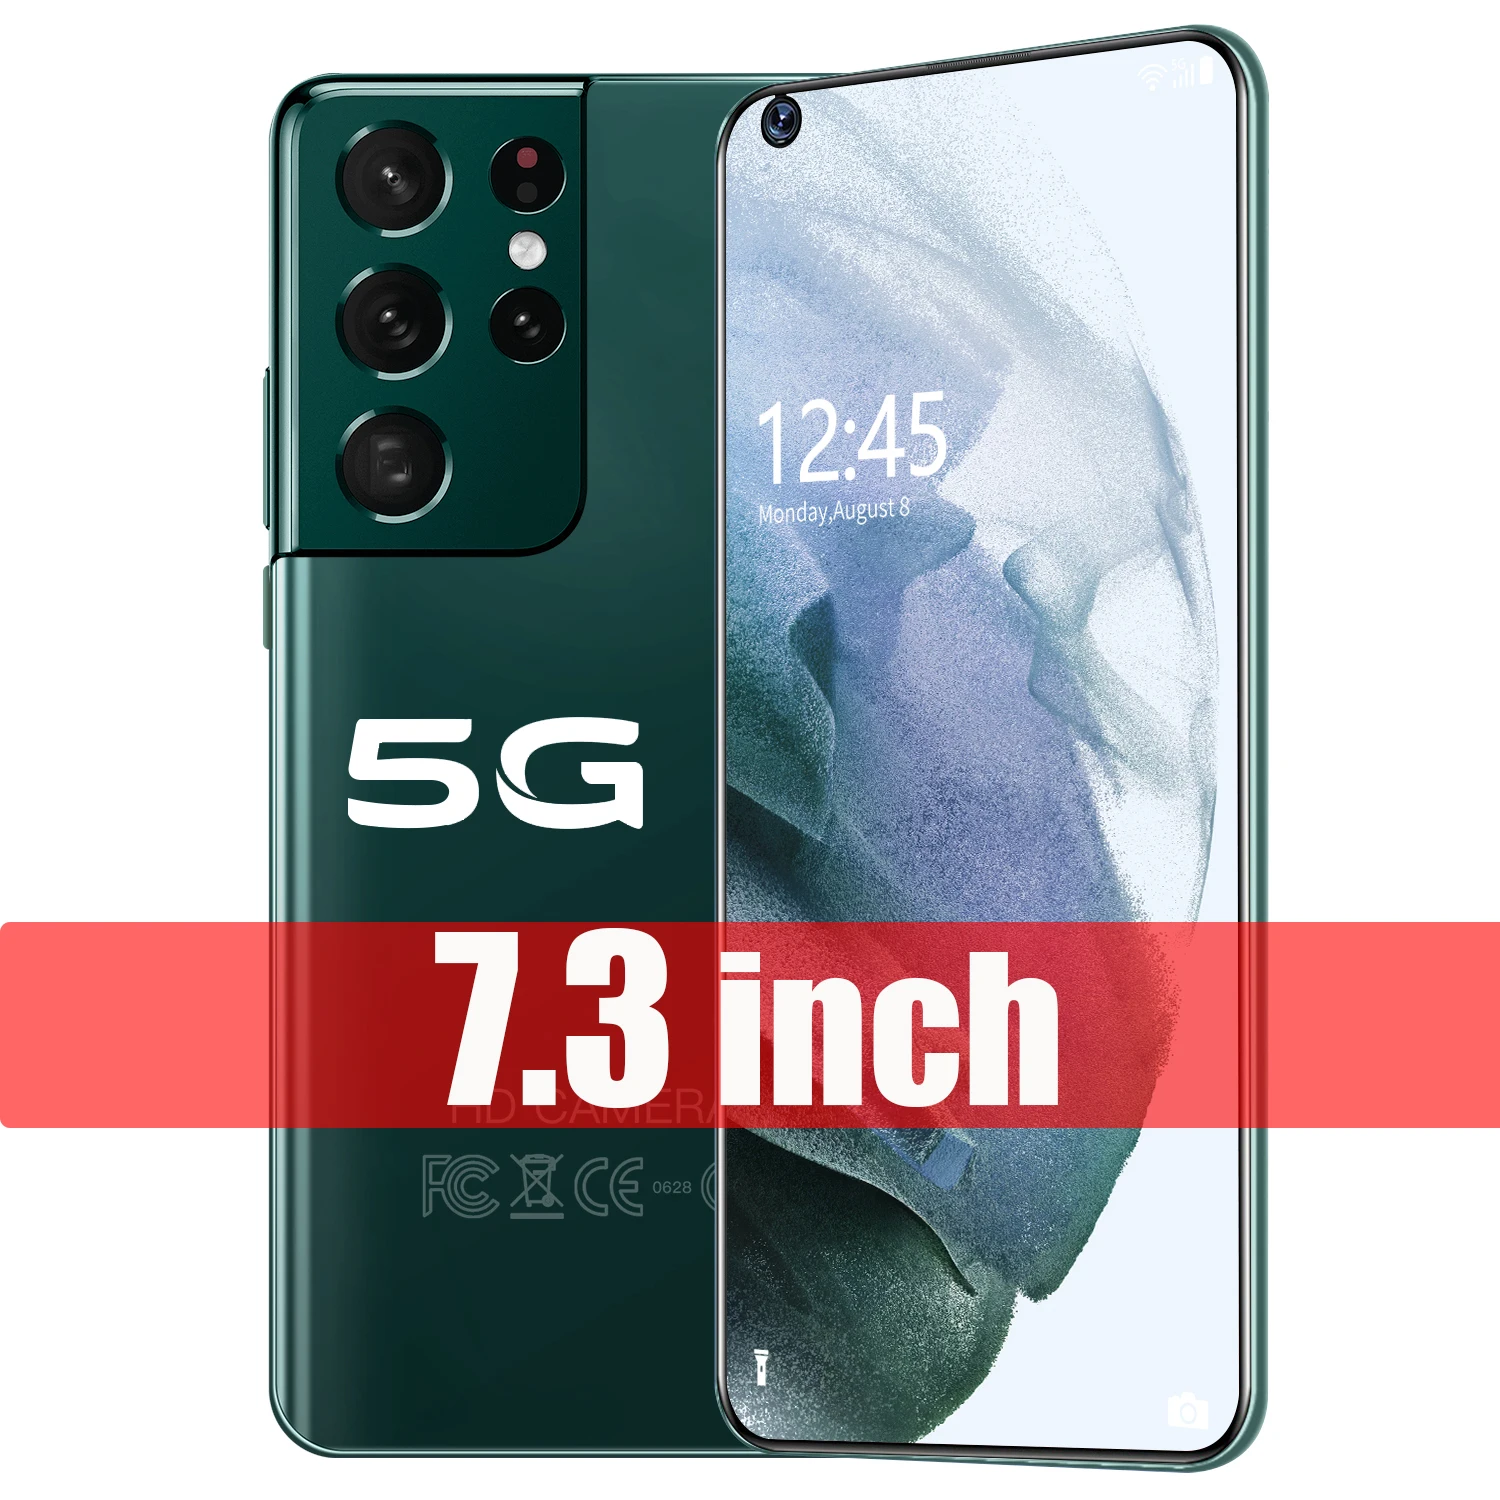 best android cell phone New S22 Ultra 7.3 HD Full screen android smartphone 16GB+512GB Mobile phone 5G cellphone 24+48MP HD camera Fashion Smart phone best android cellphones Android Phones